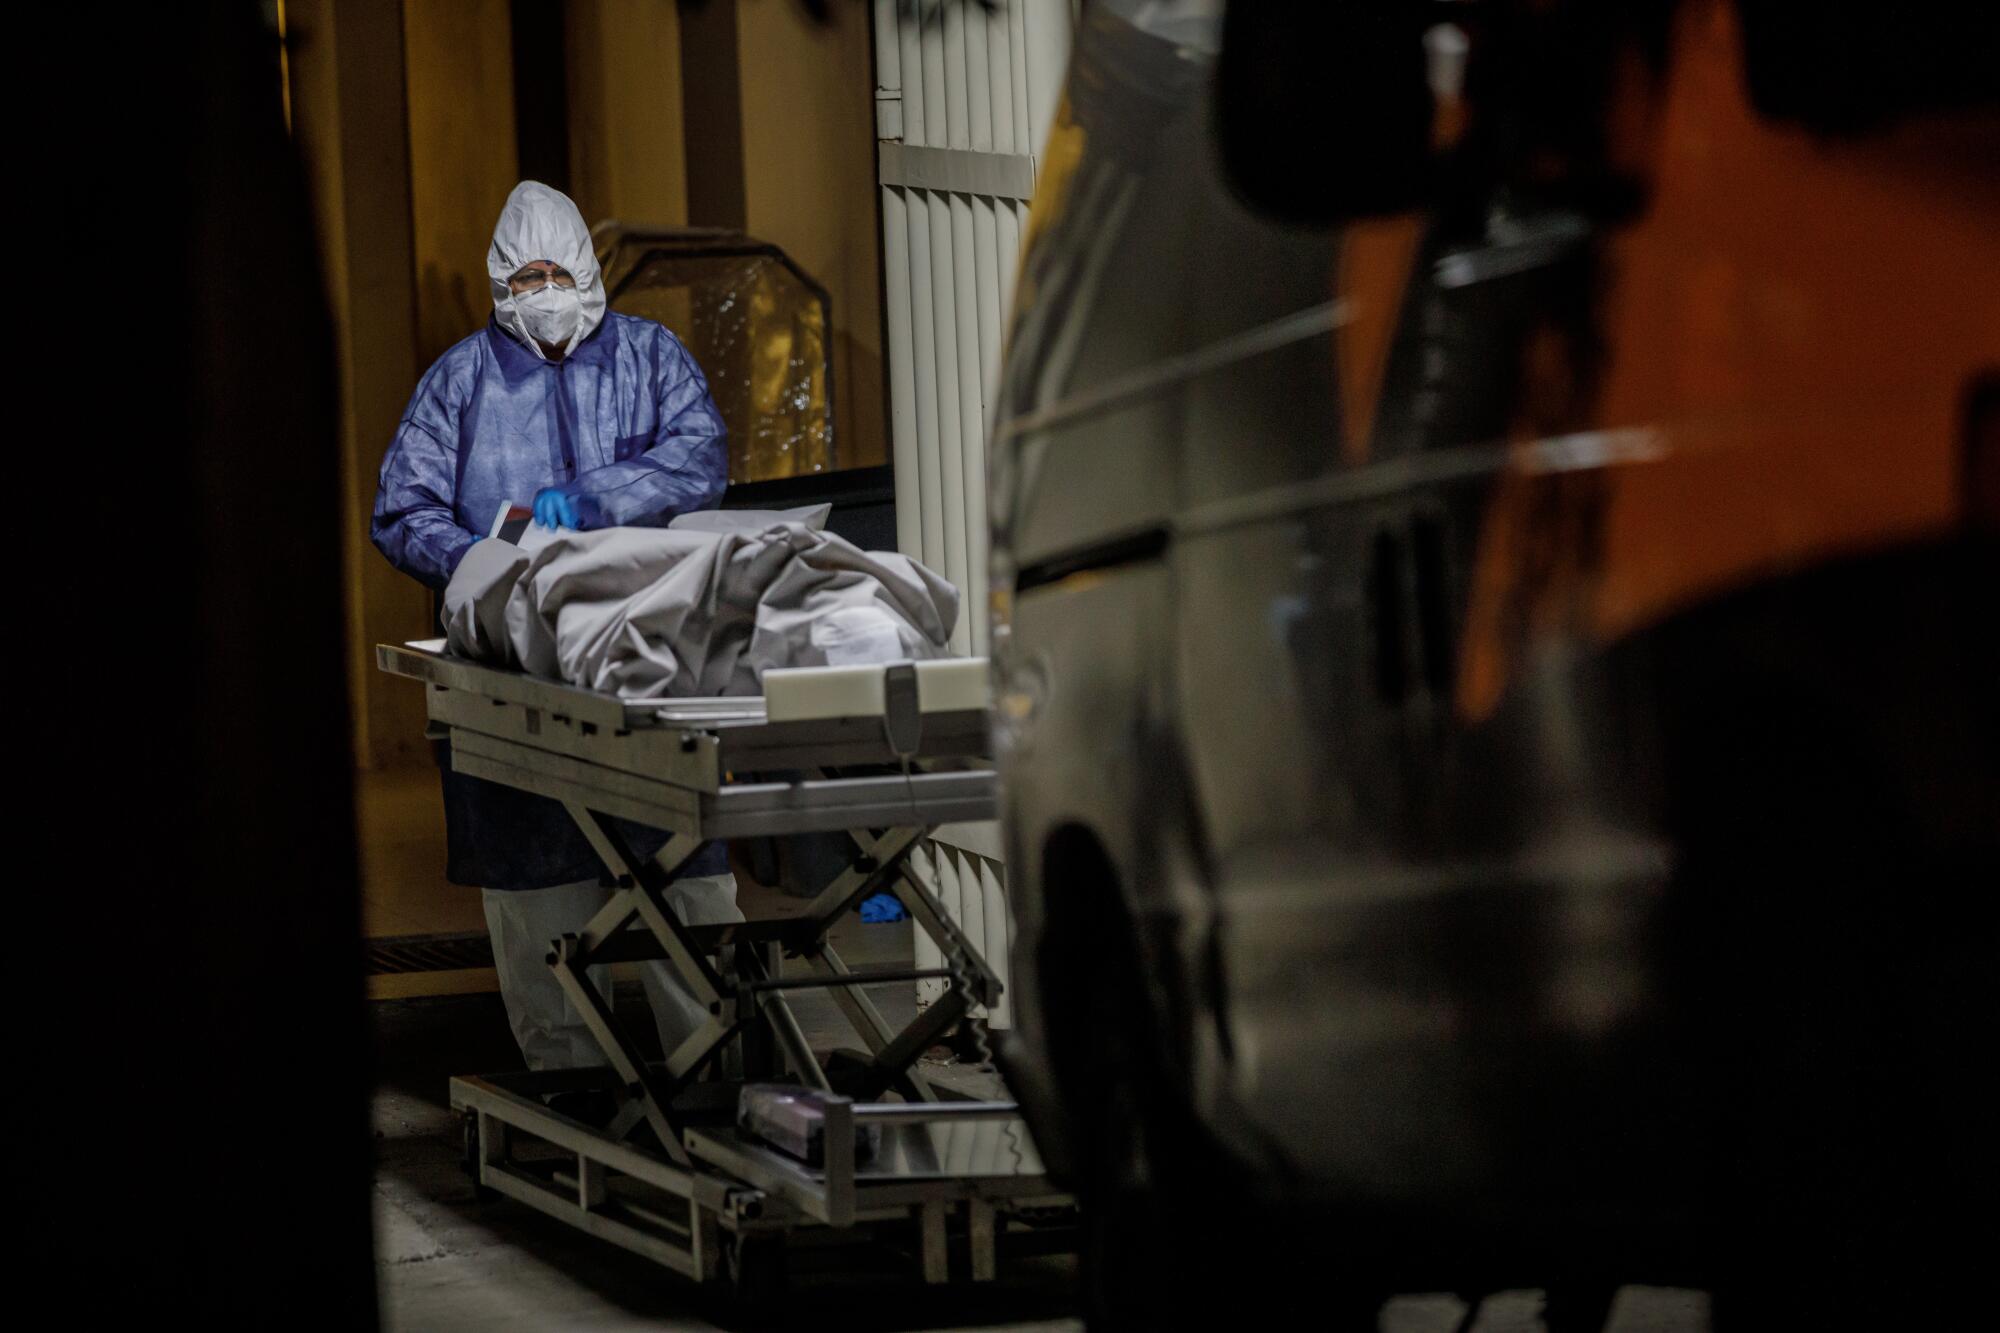 A medical worker checks paperwork before handing off a corpse for transfer to a van that will bring it to the morgue, at Tijuana General Hospital, in Tijuana, Mexico, on April 25, 2020. Tijuana General Hospital is the largest hospital in Baja California and has been set aside to treat COVID-19 patients.